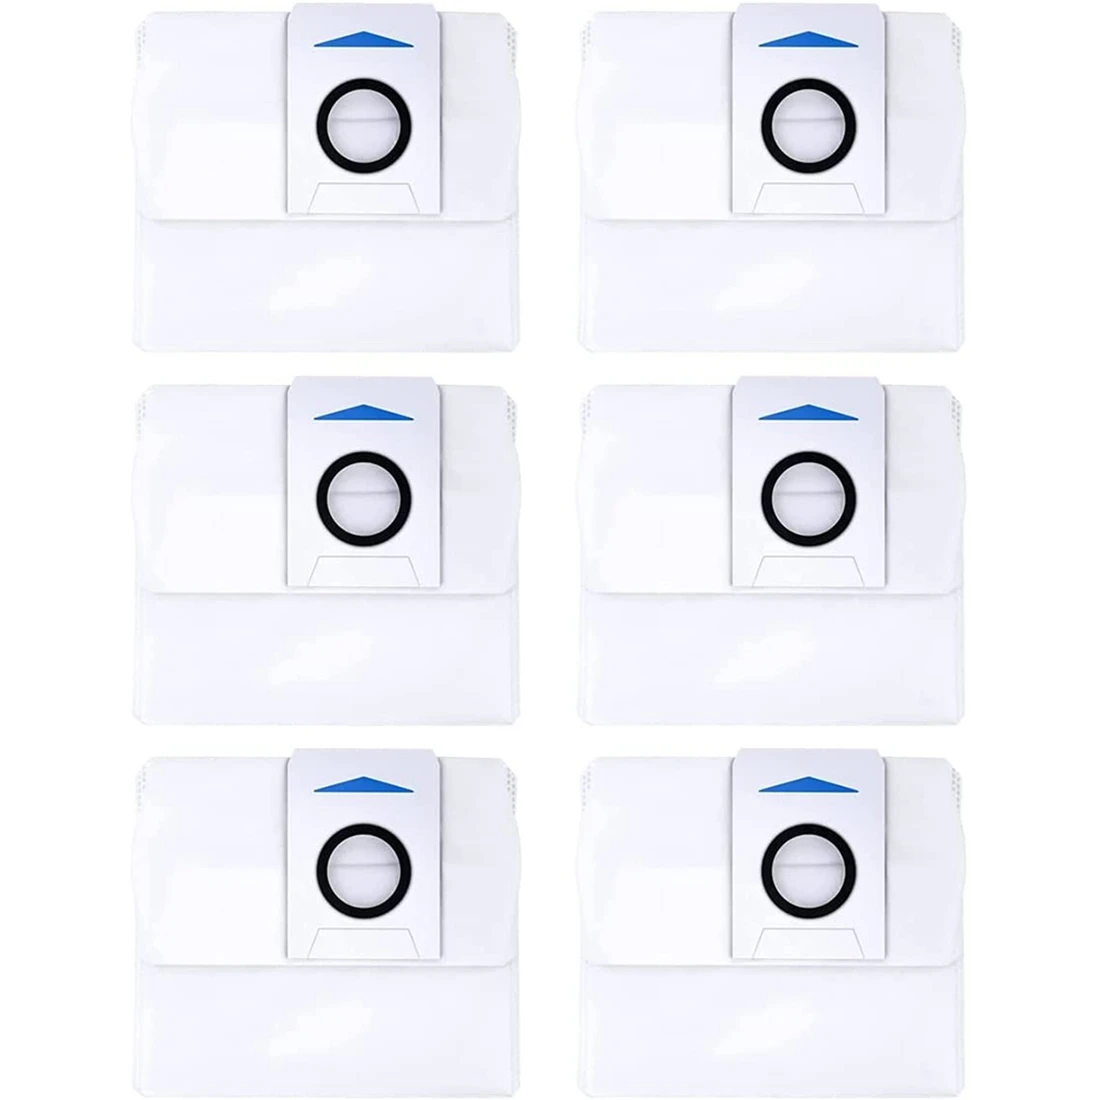 

6Pcs Dust Bag for ECOVACS DEEBOT X1 Omni Auto-Empy Station,3L Capacity Replacement Bag for ECOVAS Omni X1/X1 Plus